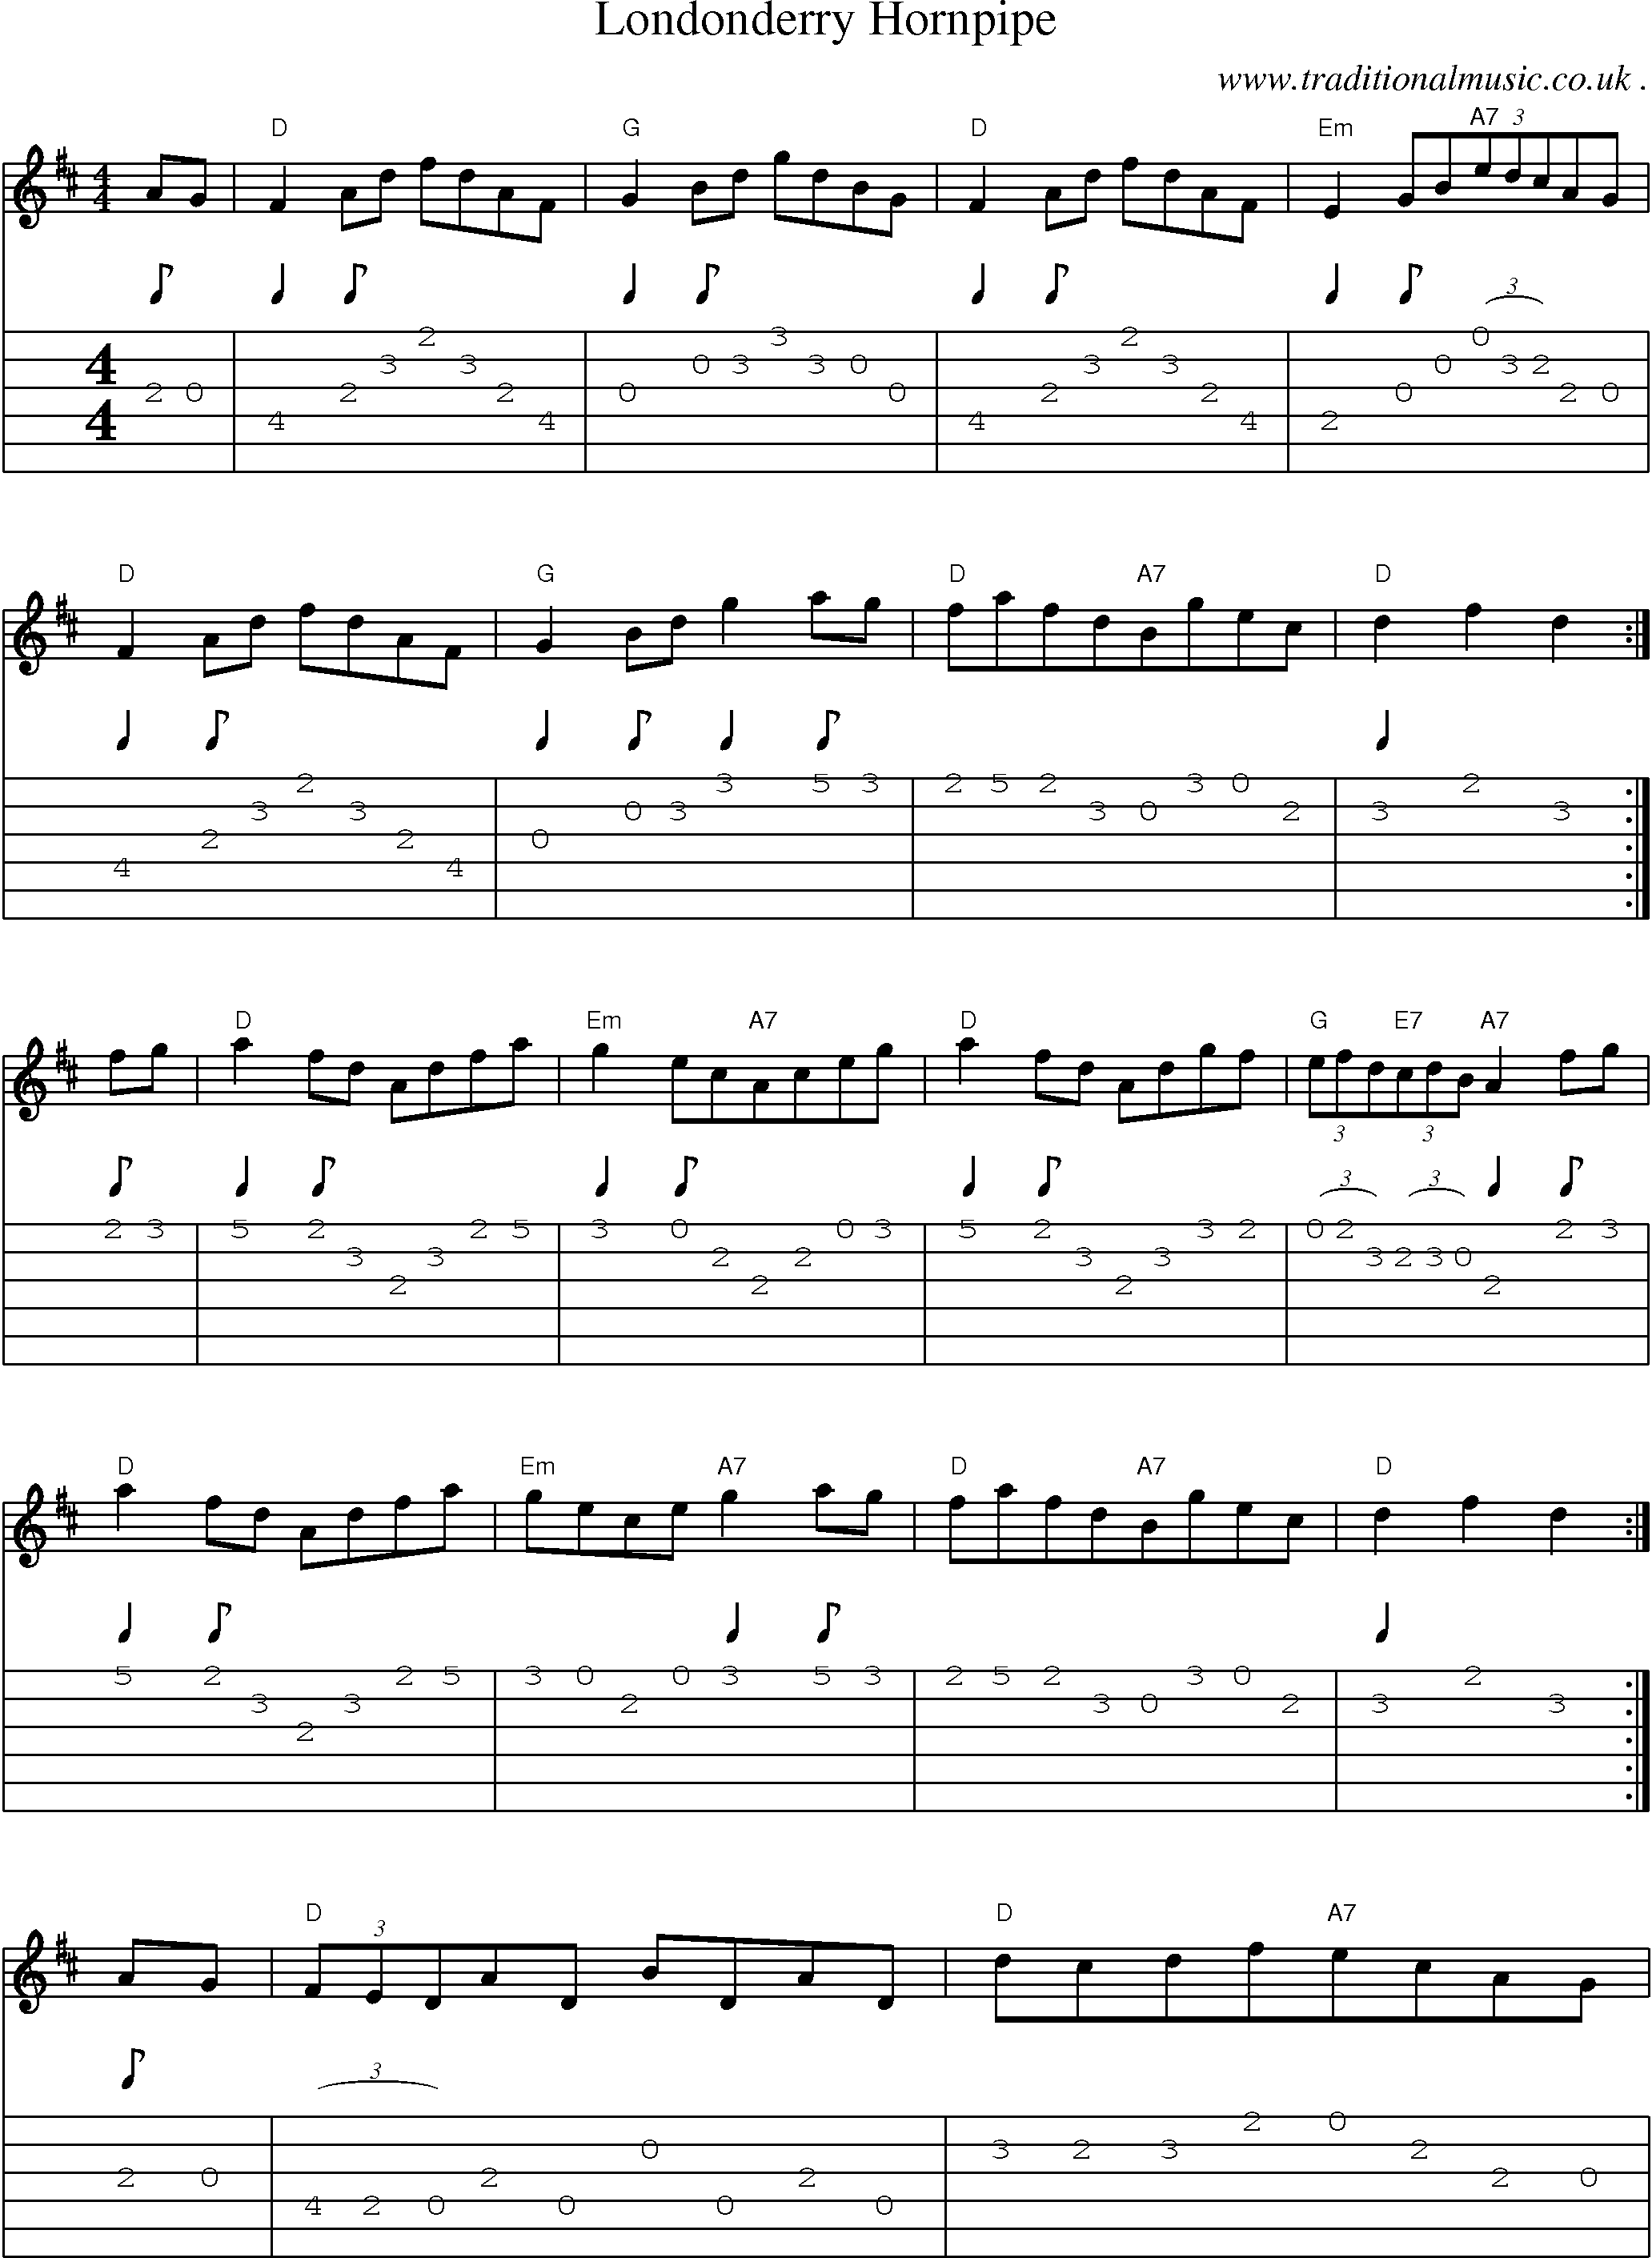 Sheet-Music and Guitar Tabs for Londonderry Hornpipe